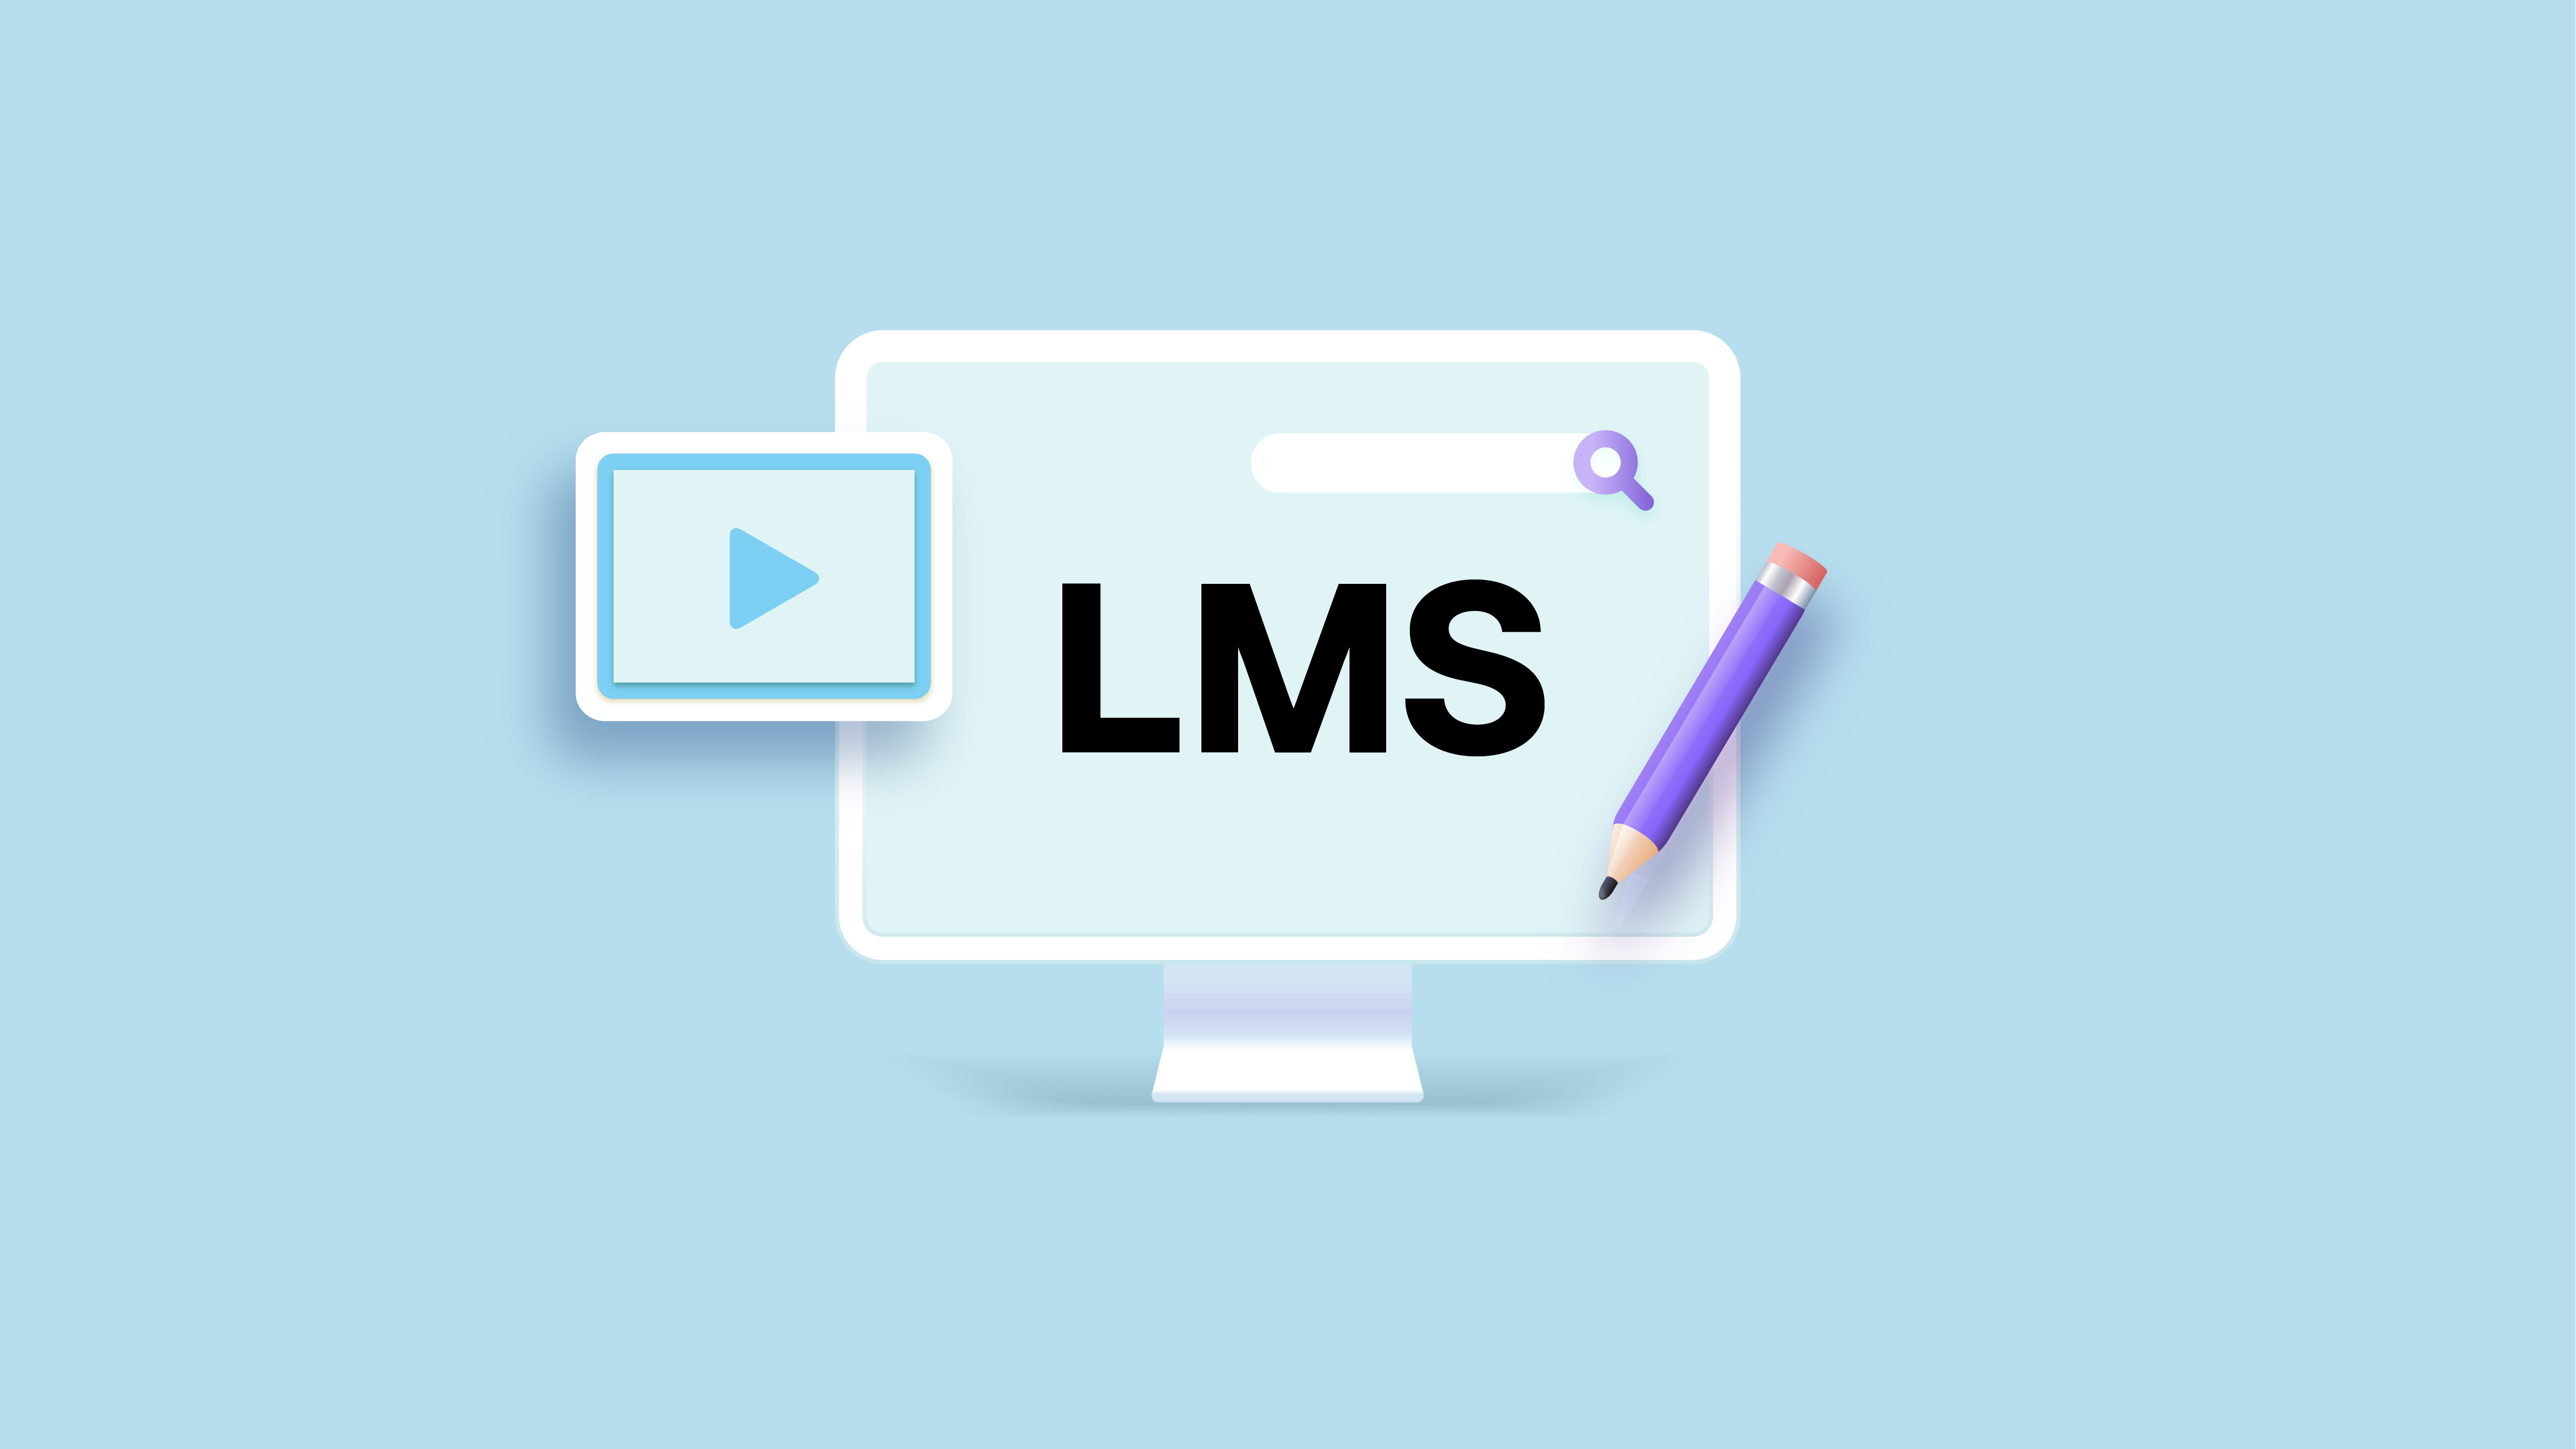 LMS Meaning? Why LMS Is Important in Digital Education